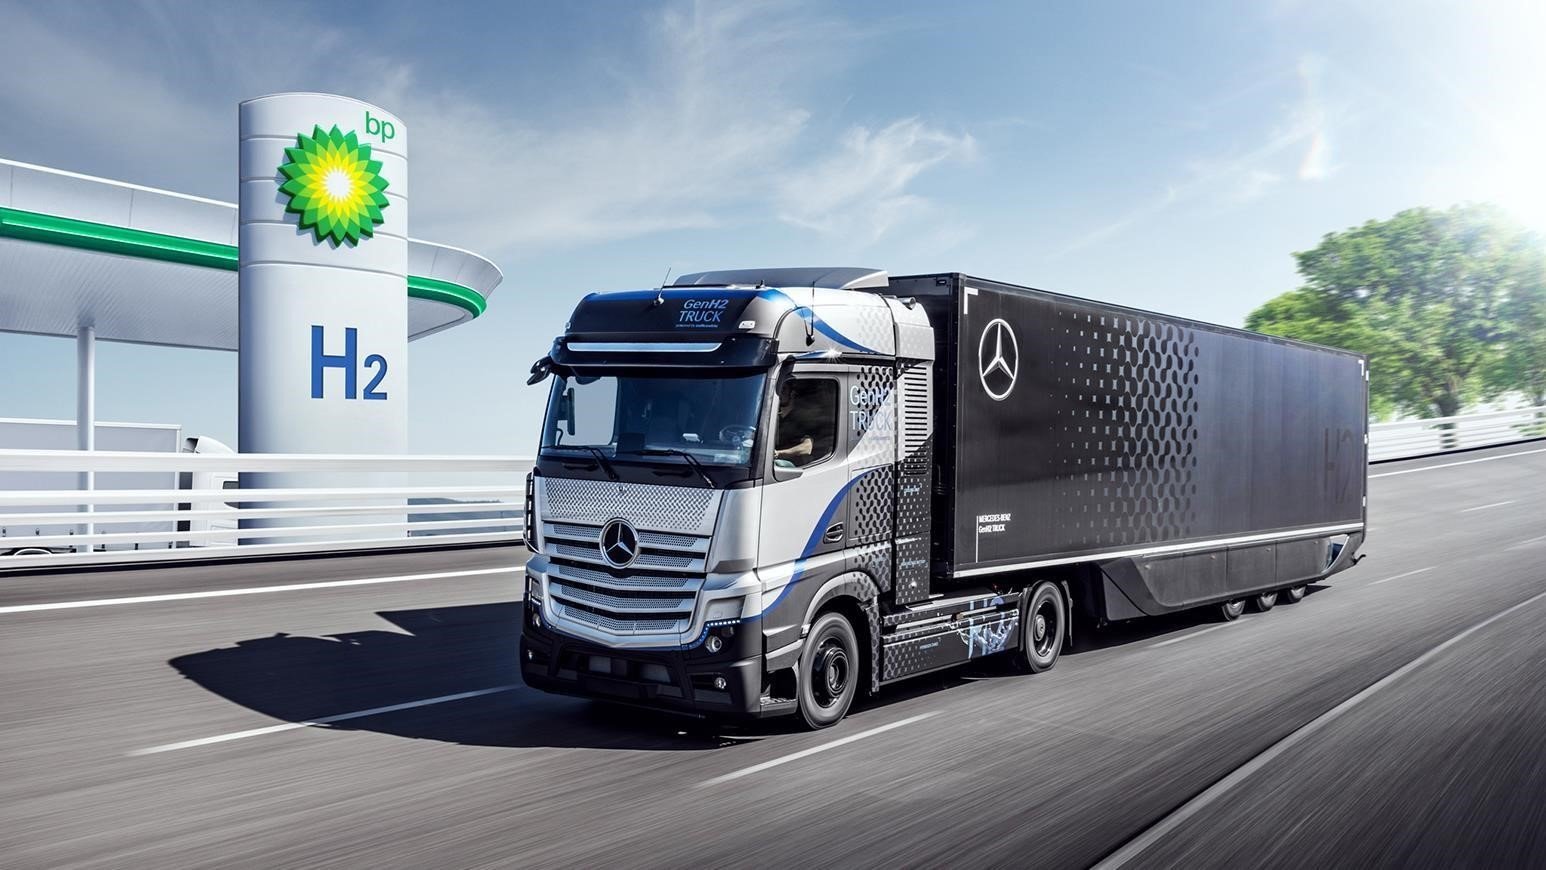 Daimler Truck AG & BP To Pioneer Deployment Of Hydrogen Infrastructure, Supporting The Decarbonization of UK Freight Transport